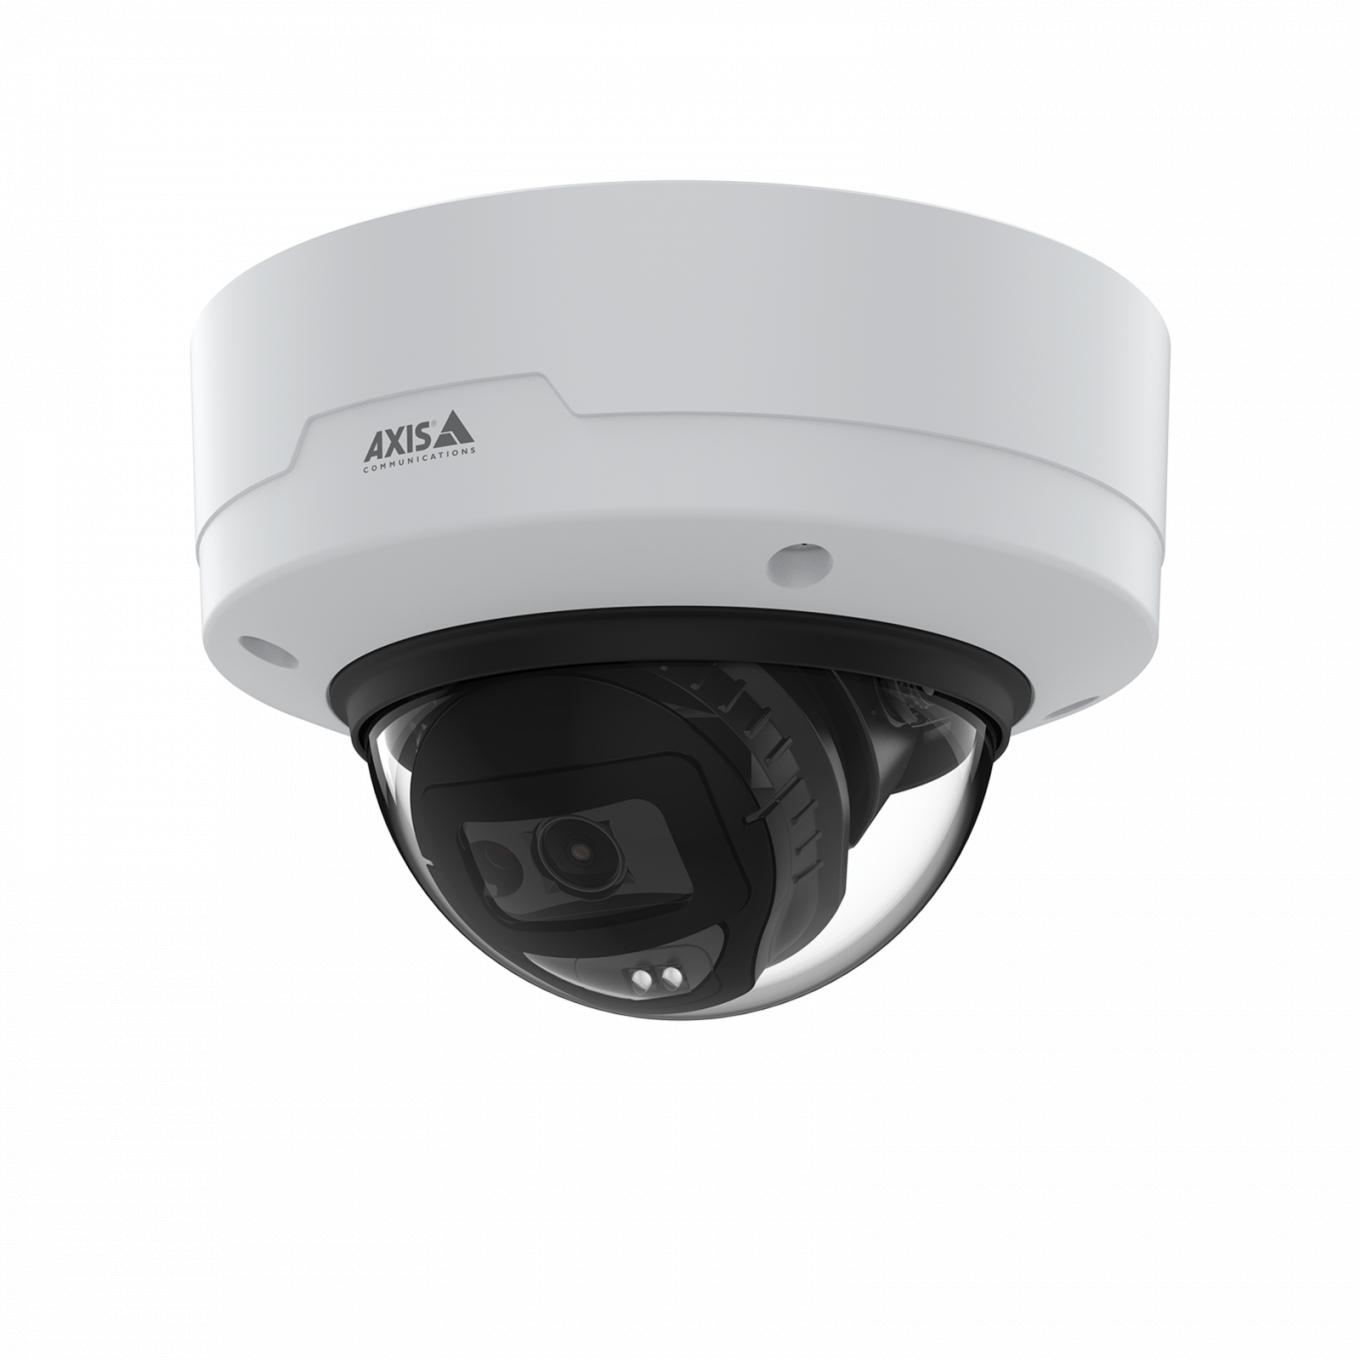 AXIS M3216-LVE in black and white, mounted in the celing